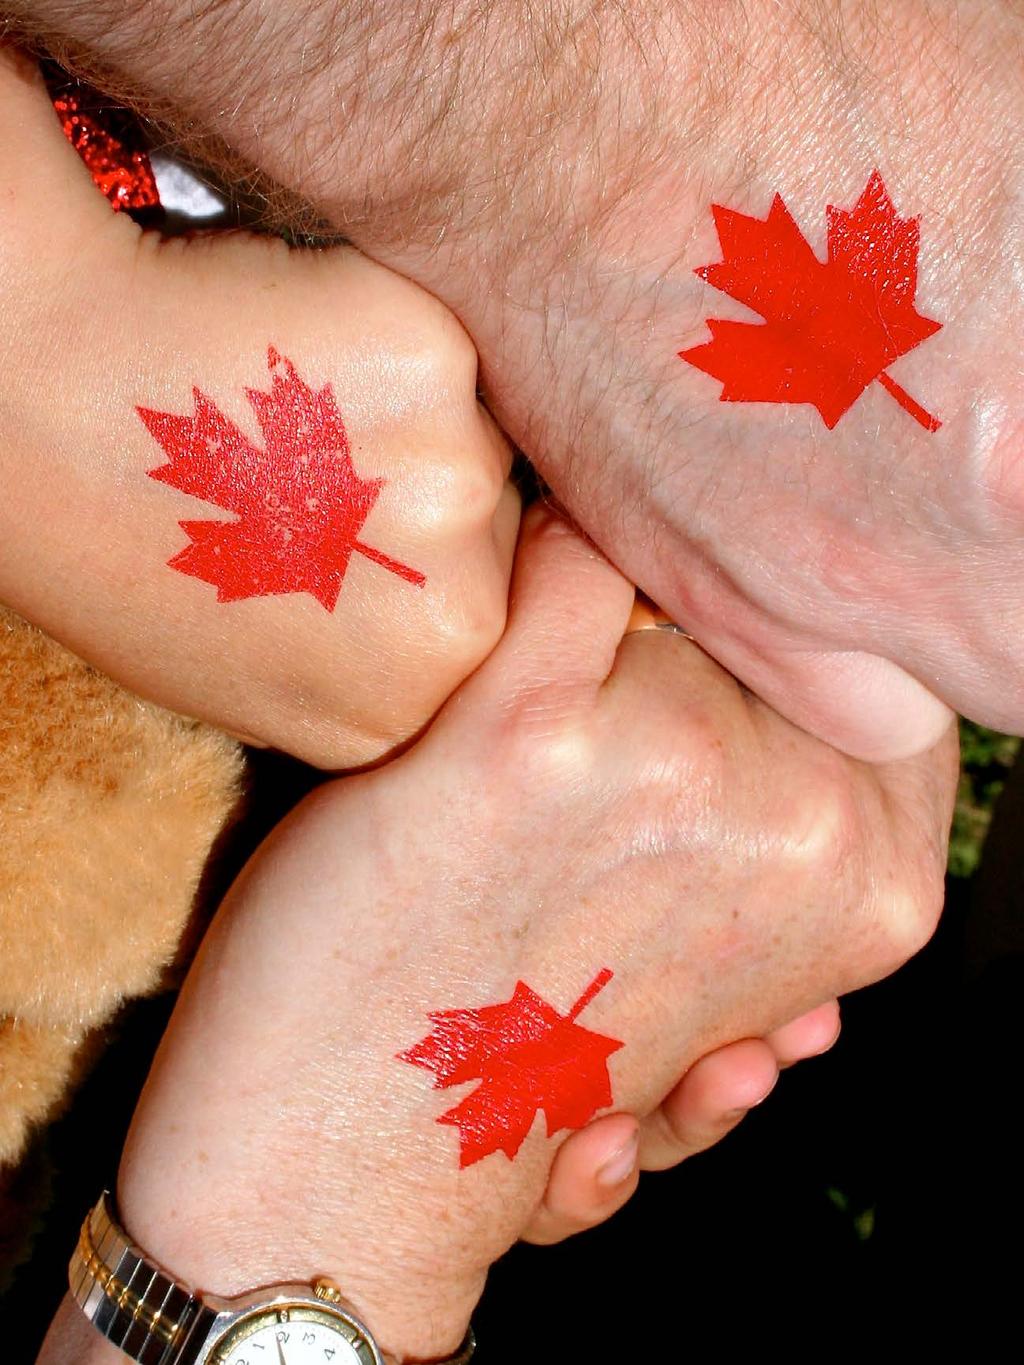 Canada Day July 1 A federal statutory holiday, Canada Day celebrates the anniversary of the July 1, 1867 enactment